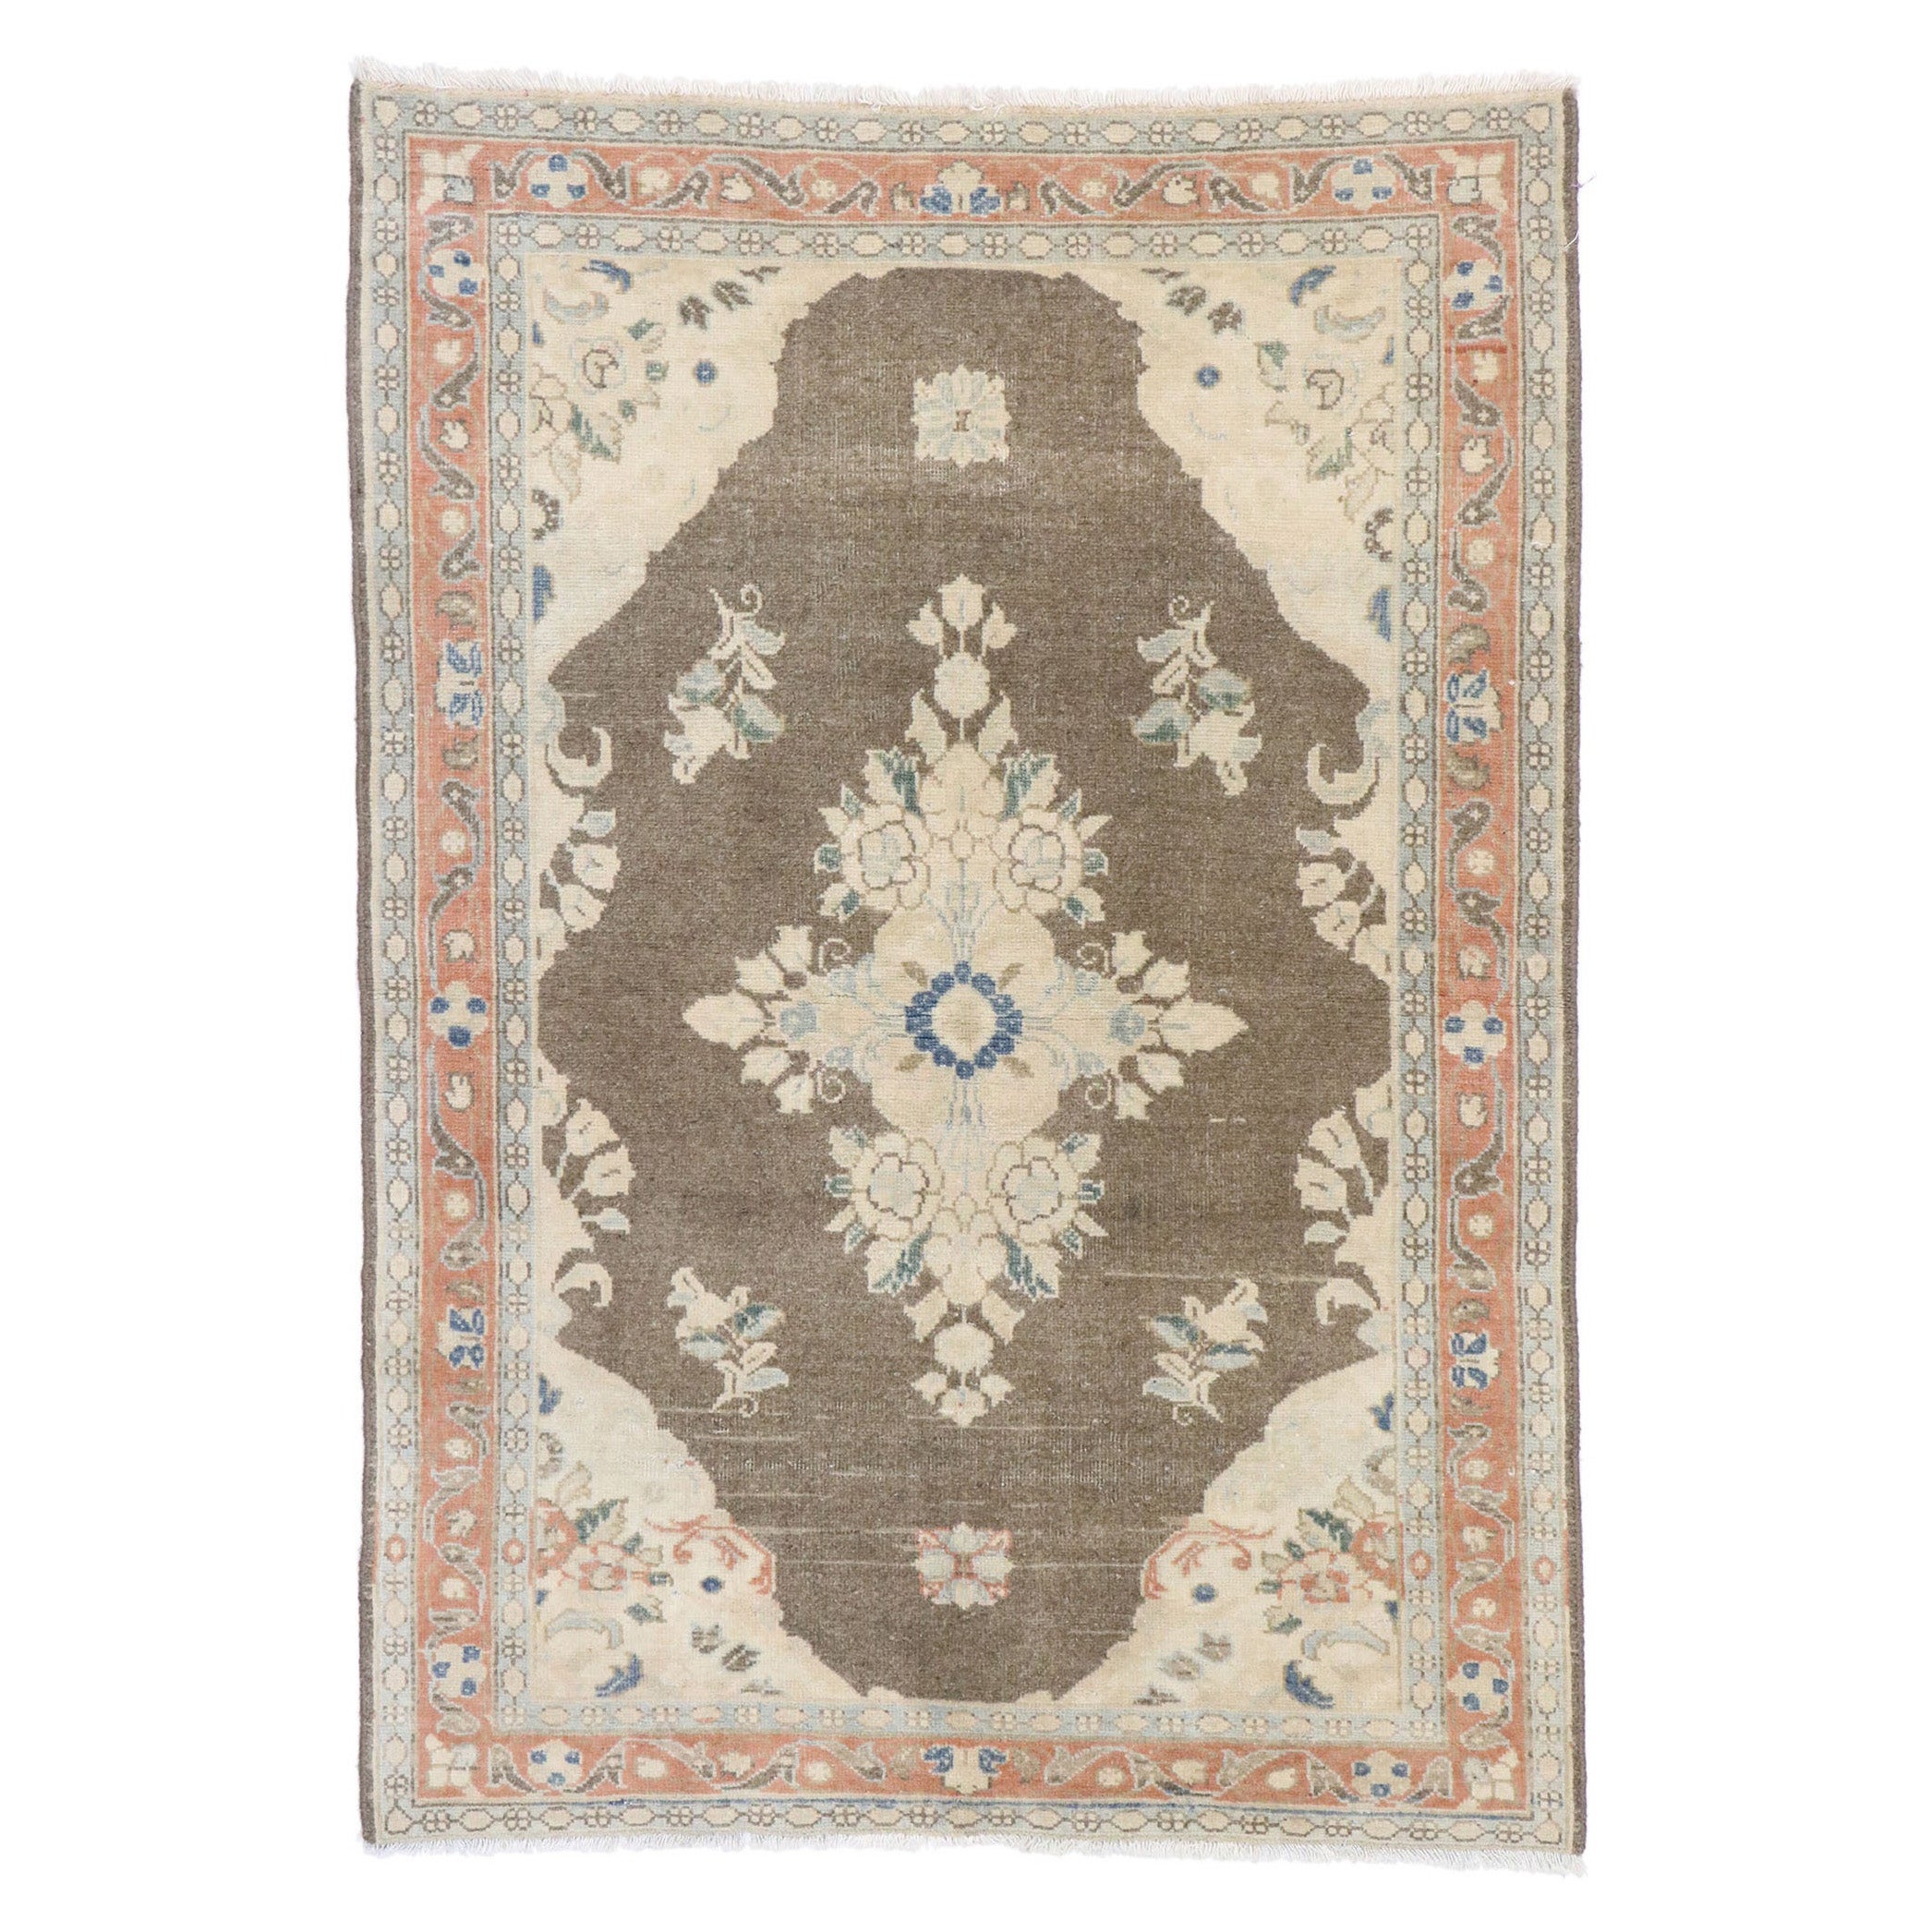 Distressed Vintage Persian Viss Rug with Rustic Farmhouse Style